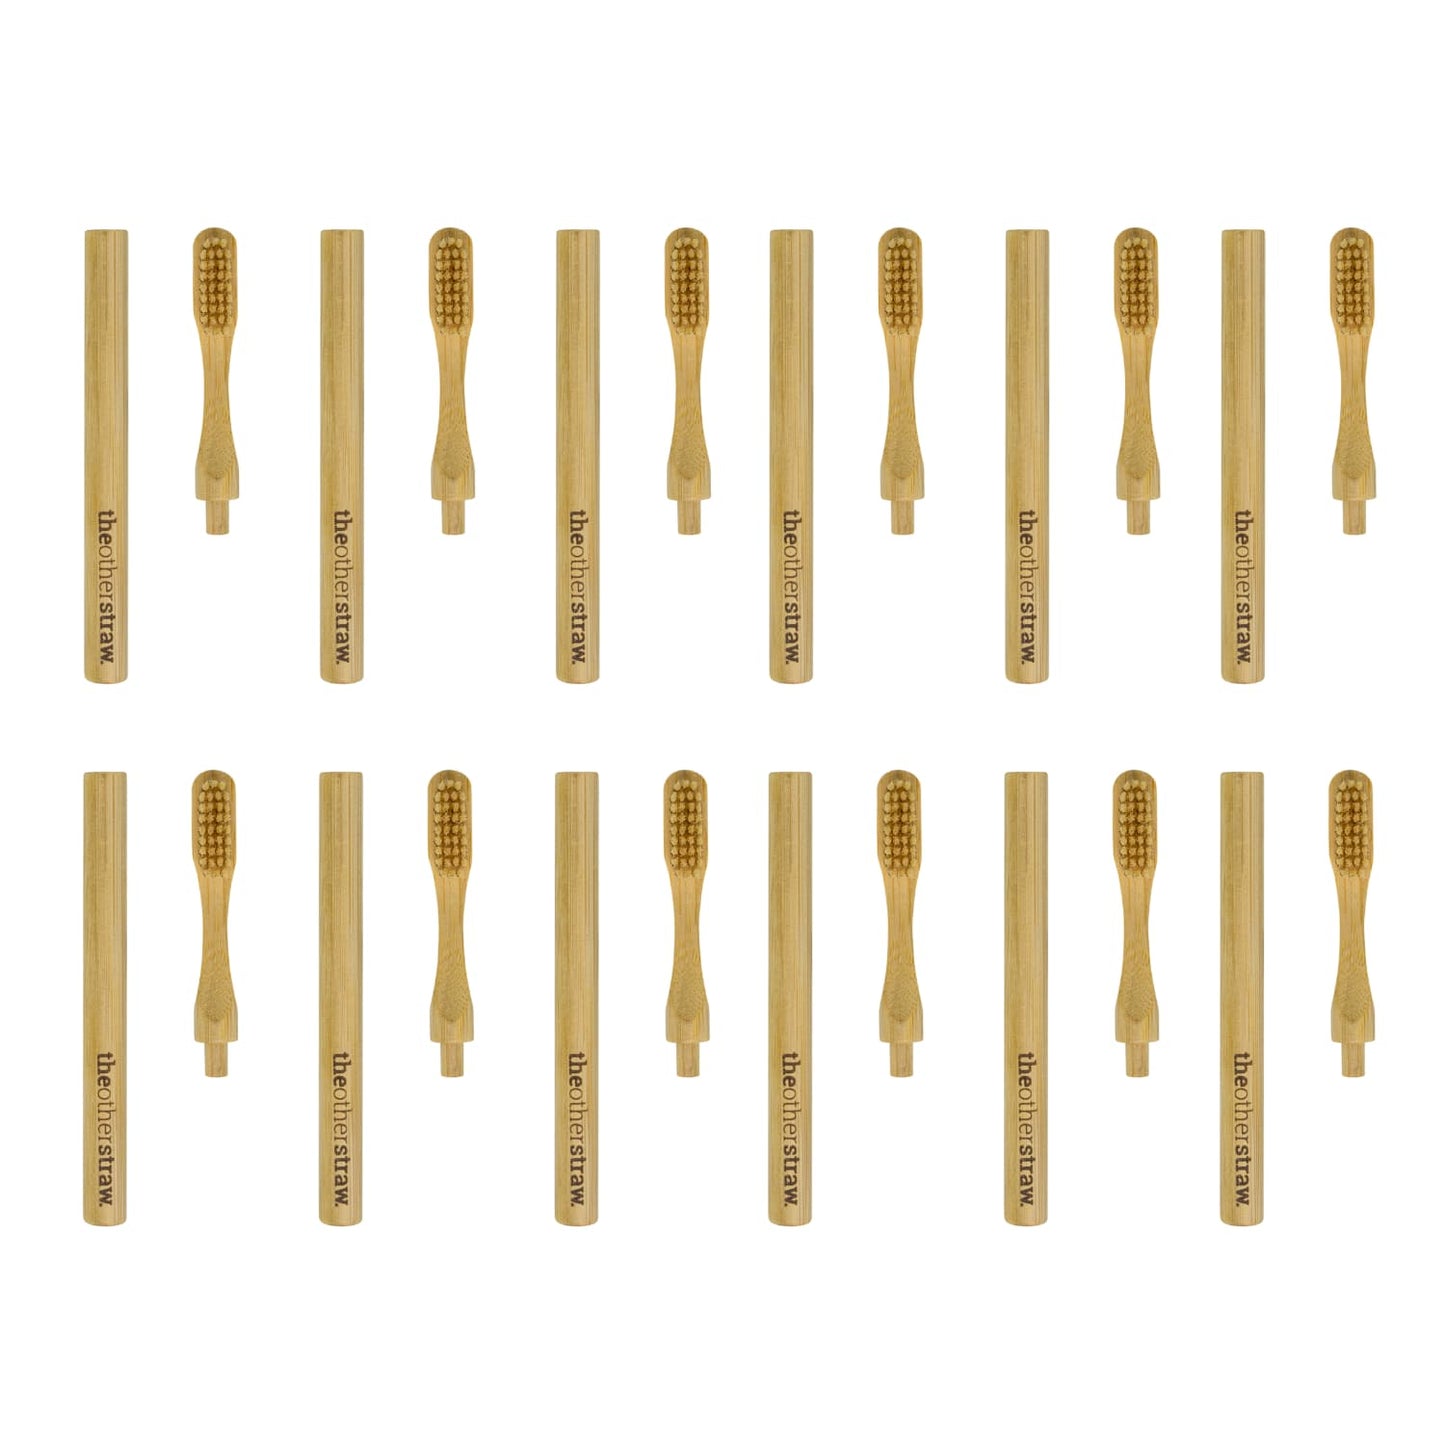 12 bamboo toothbrushes and detachable head